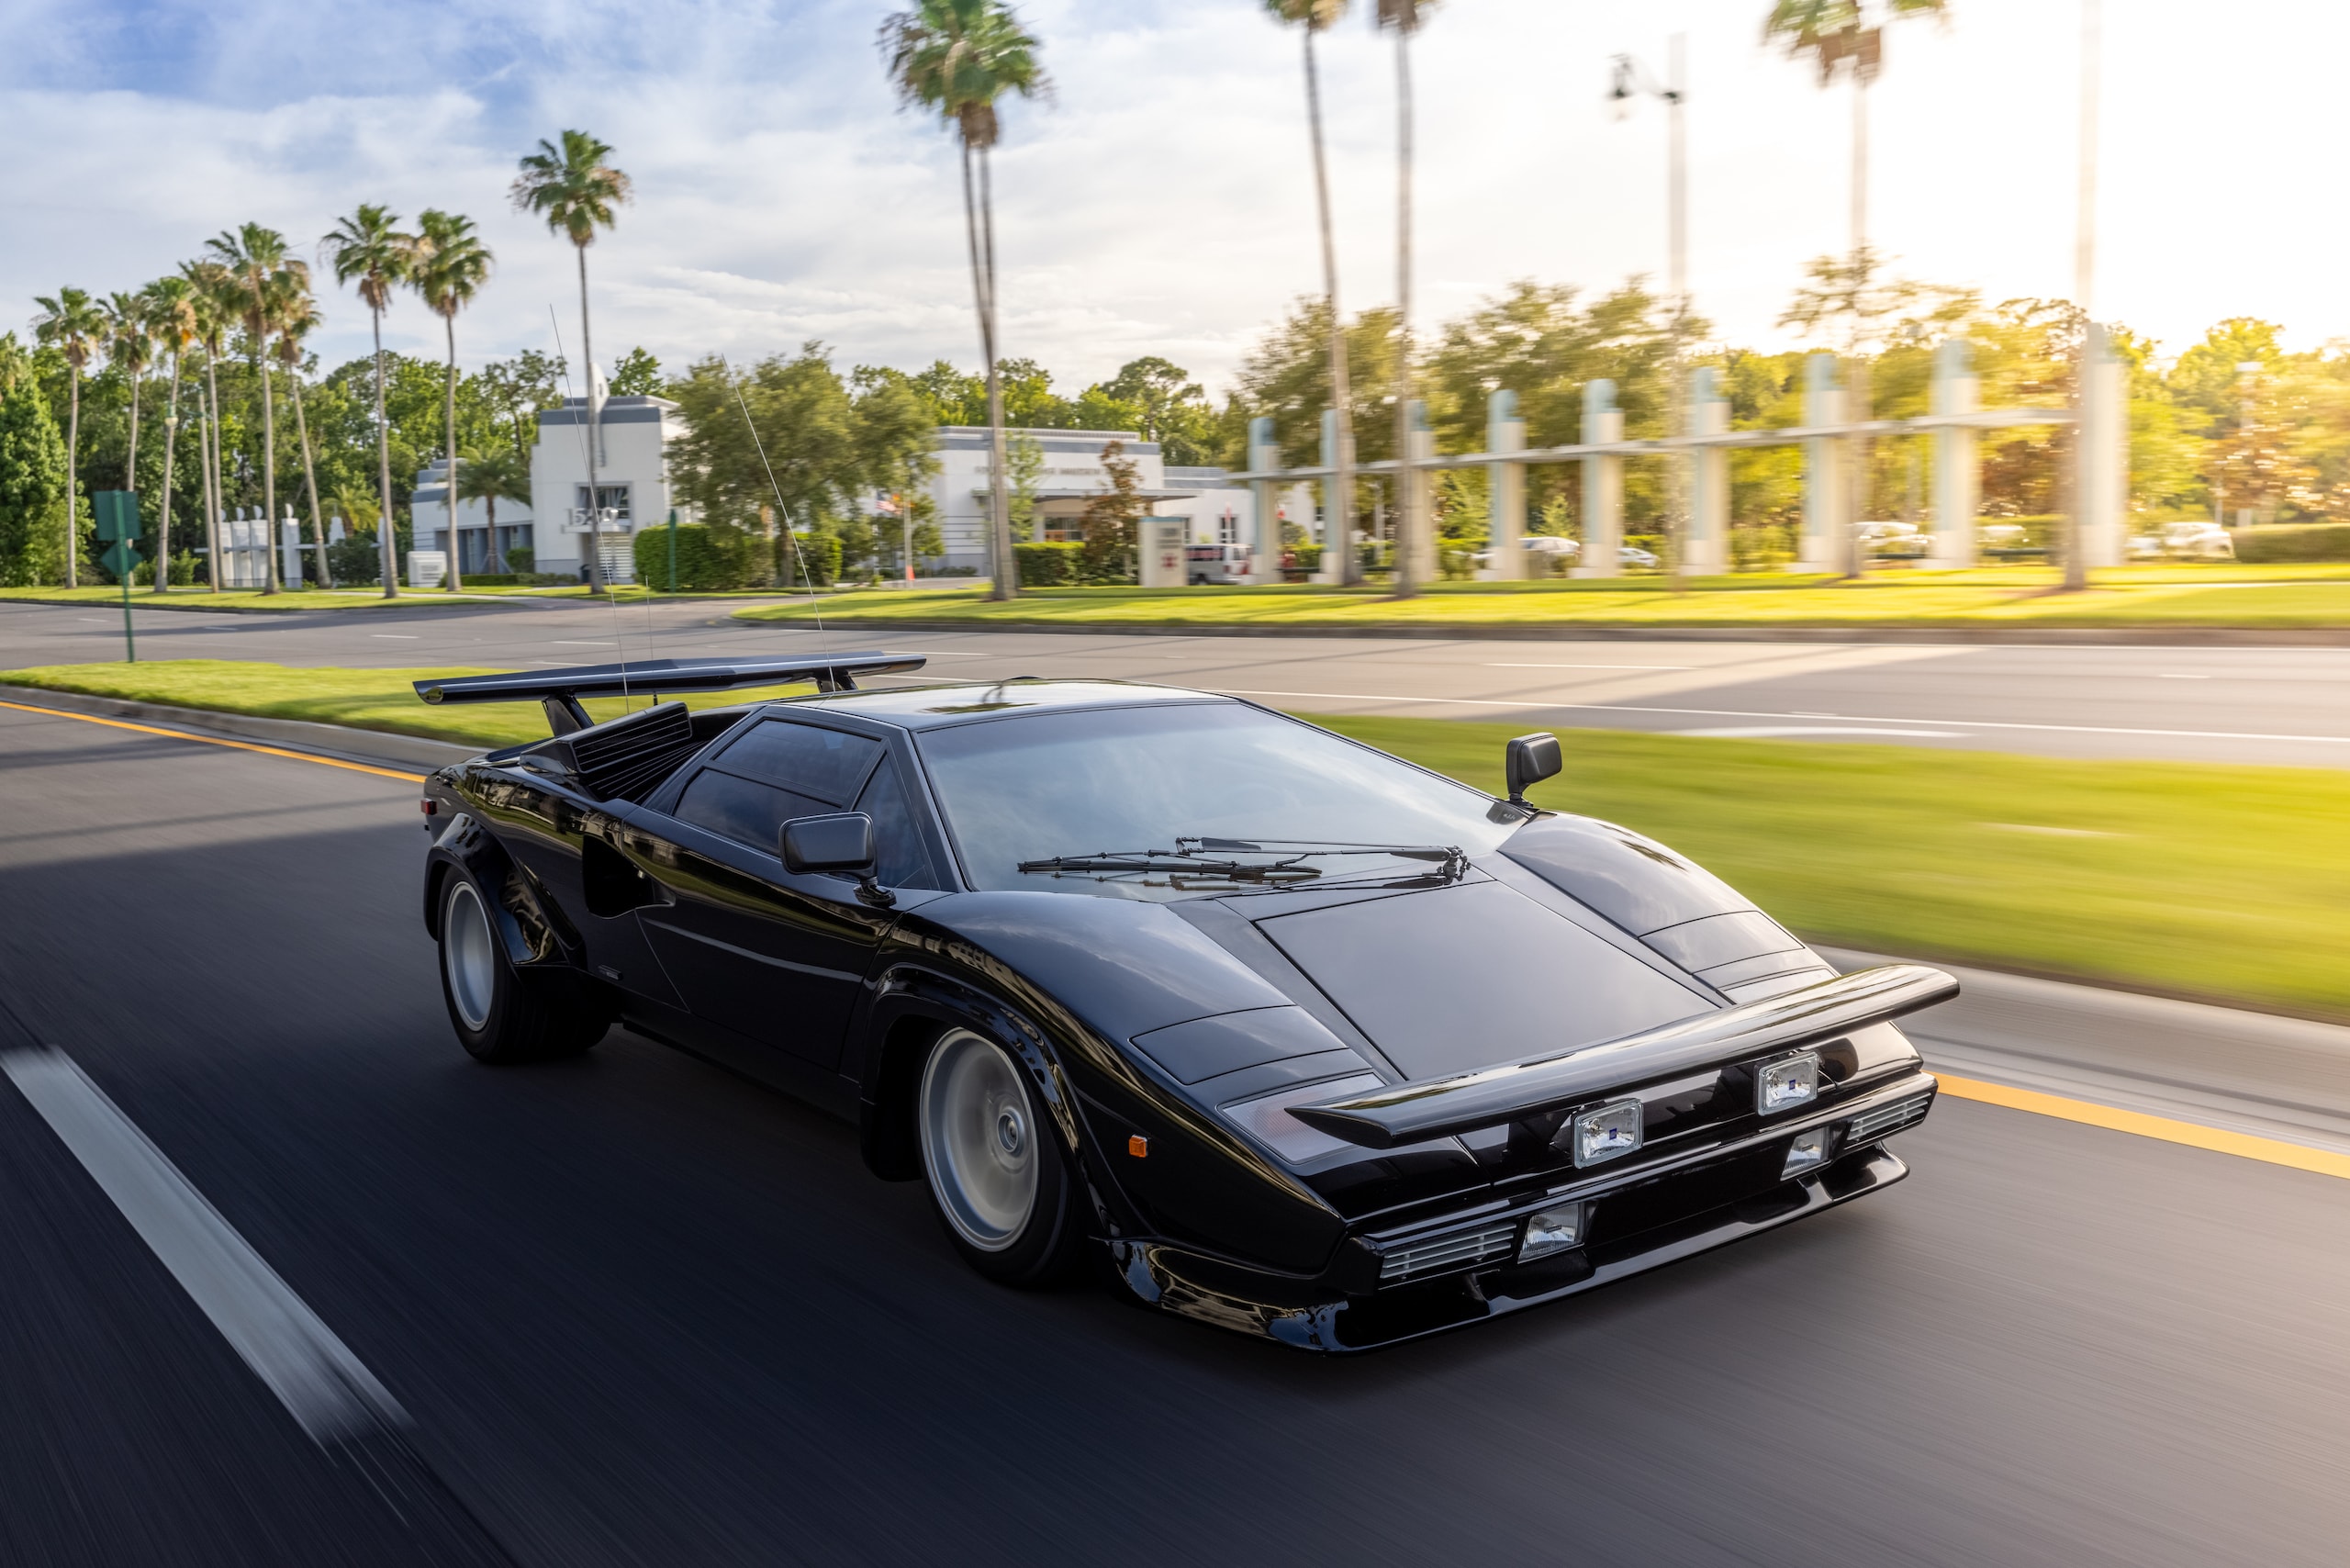 https://s1.cdn.autoevolution.com/images/news/1979-lamborghini-countach-from-the-cannonball-run-is-now-a-historic-vehicle-167317_1.jpg